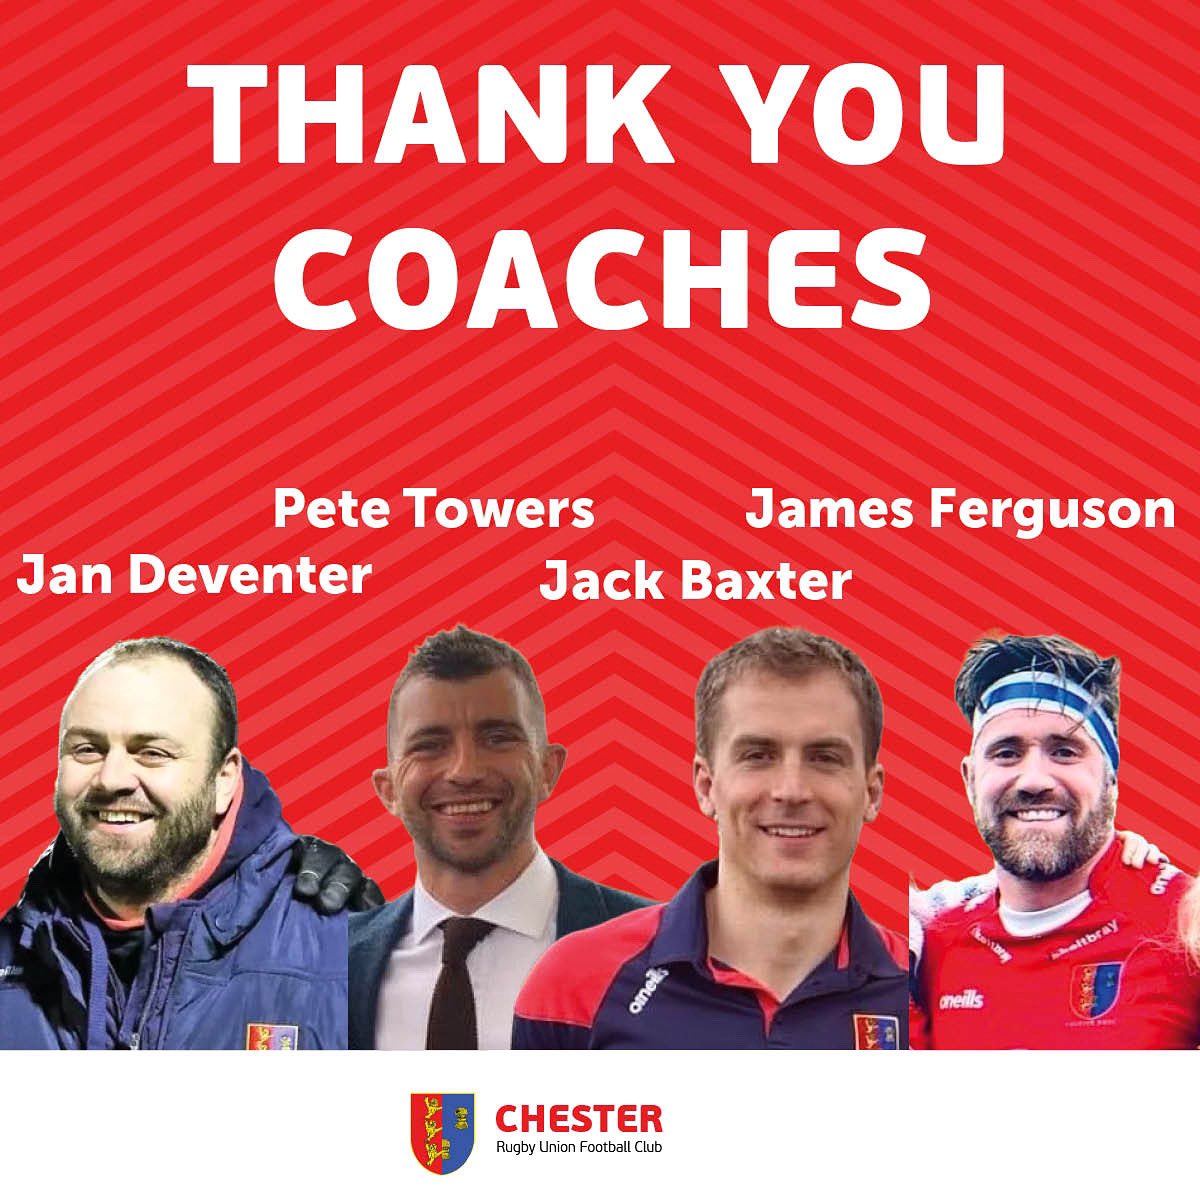 A massive thank you to these chaps for everything they’ve done for our club #upthechess